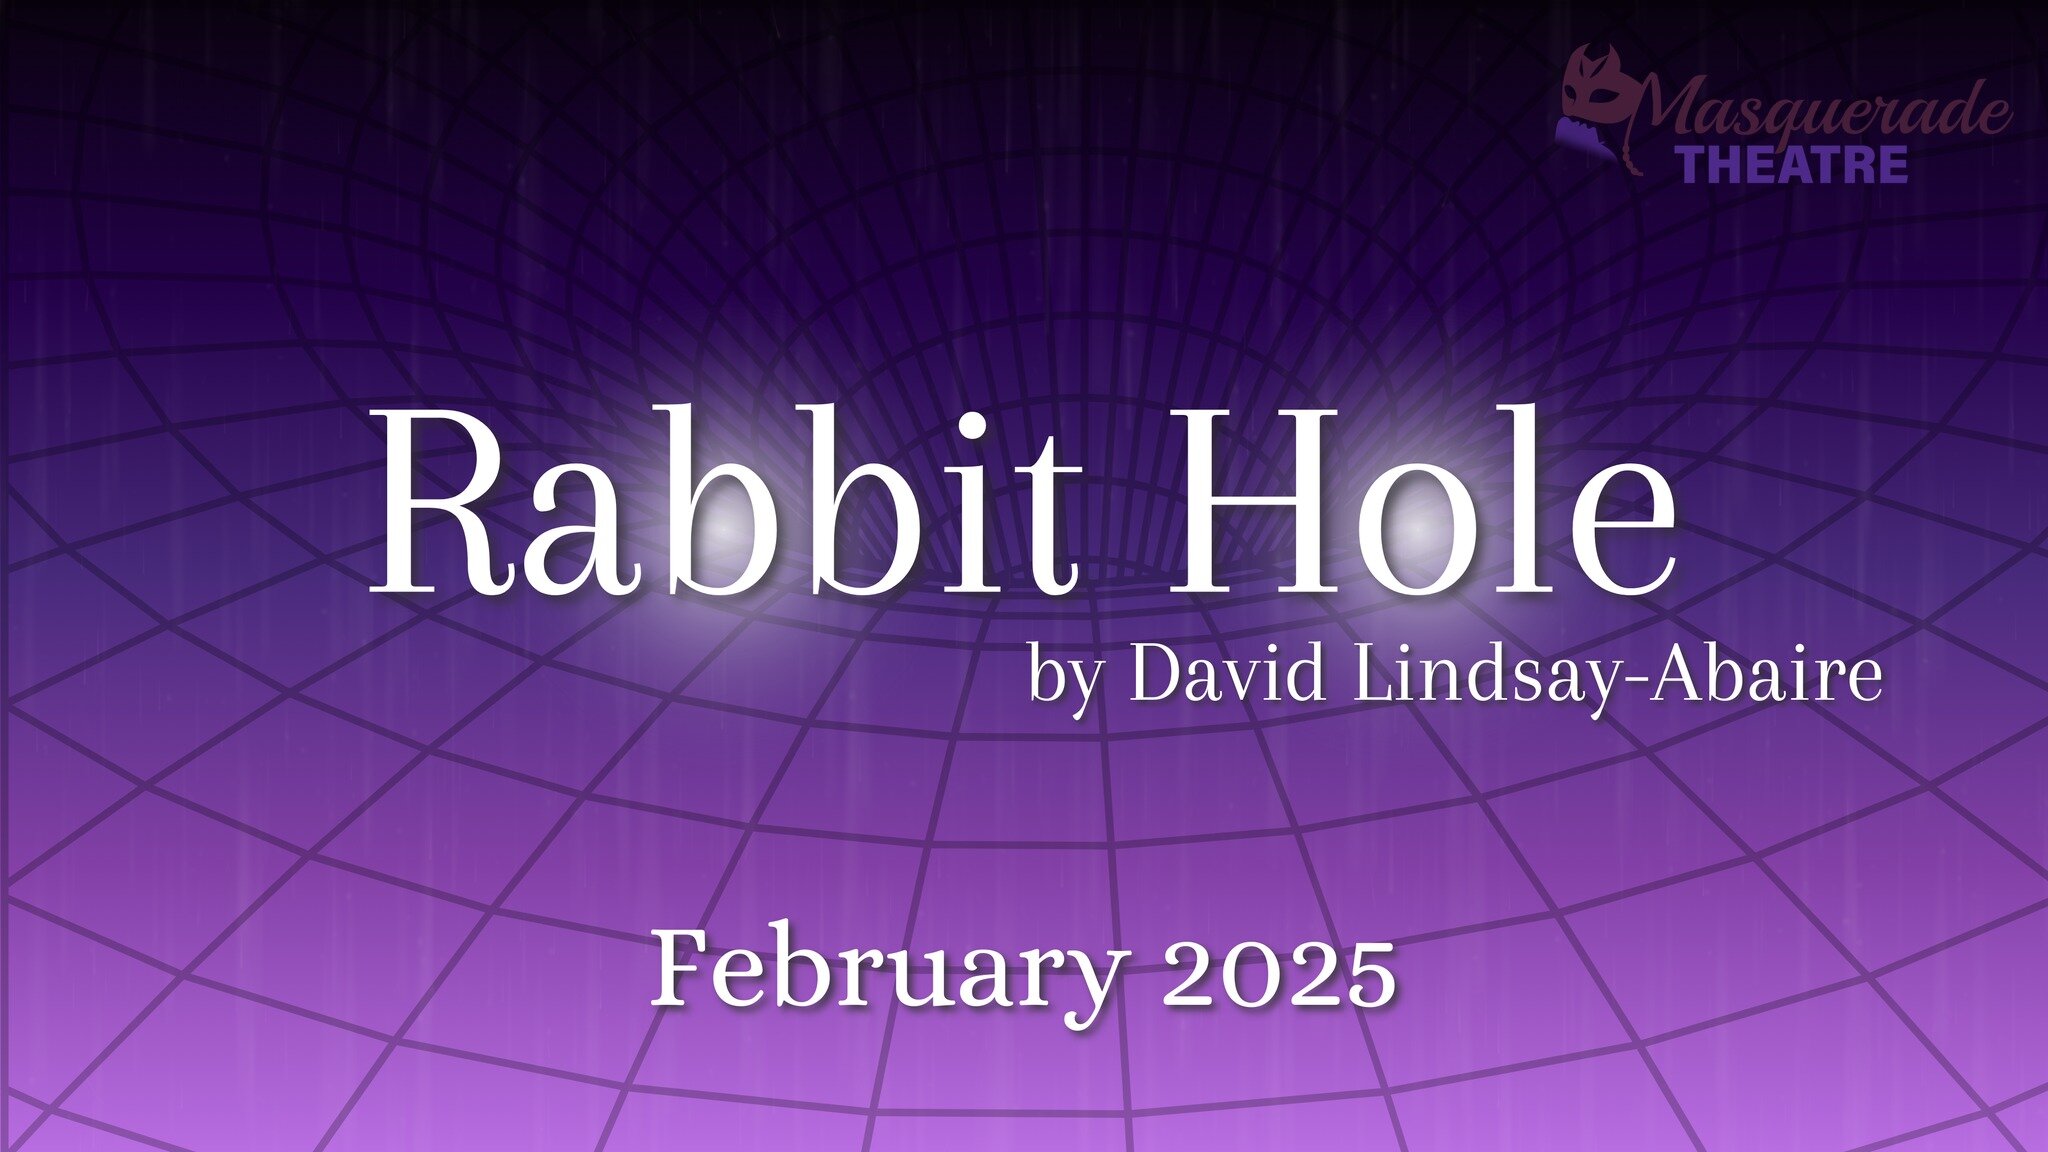 Show Reveal #3!

&quot;Rabbit Hole&quot; by David Lindsay-Abaire
Directed by Megan Knowlton Balne

Becca and Howie Corbett have everything a family could want, until a life-shattering accident turns their world upside down and leaves the couple drift